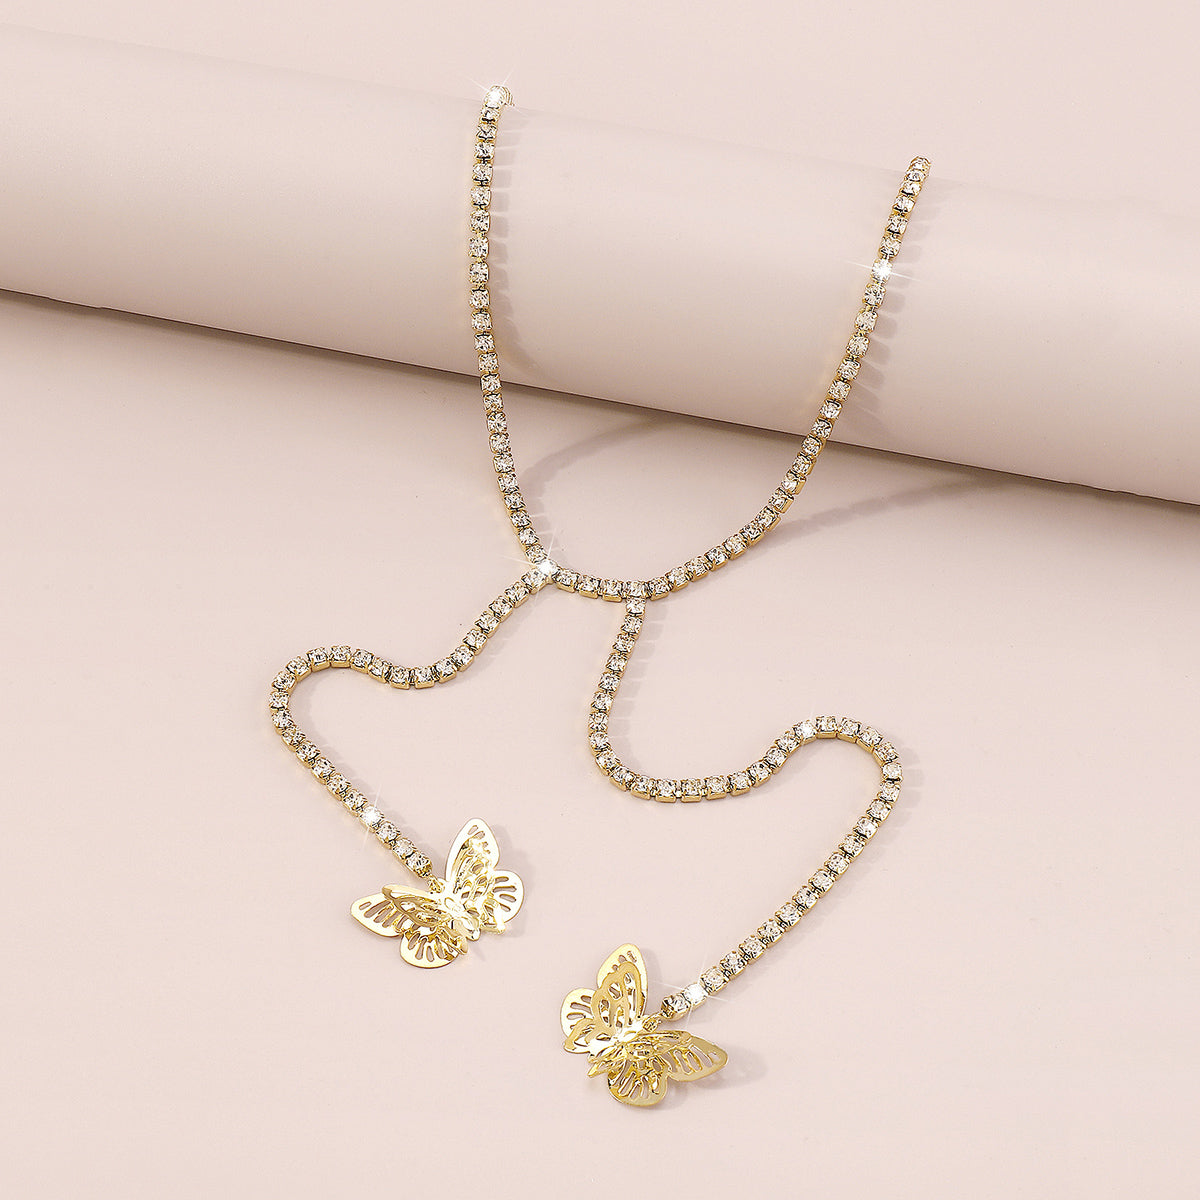 Double Long Pendant Butterfly Tennis Necklace medyjewelry